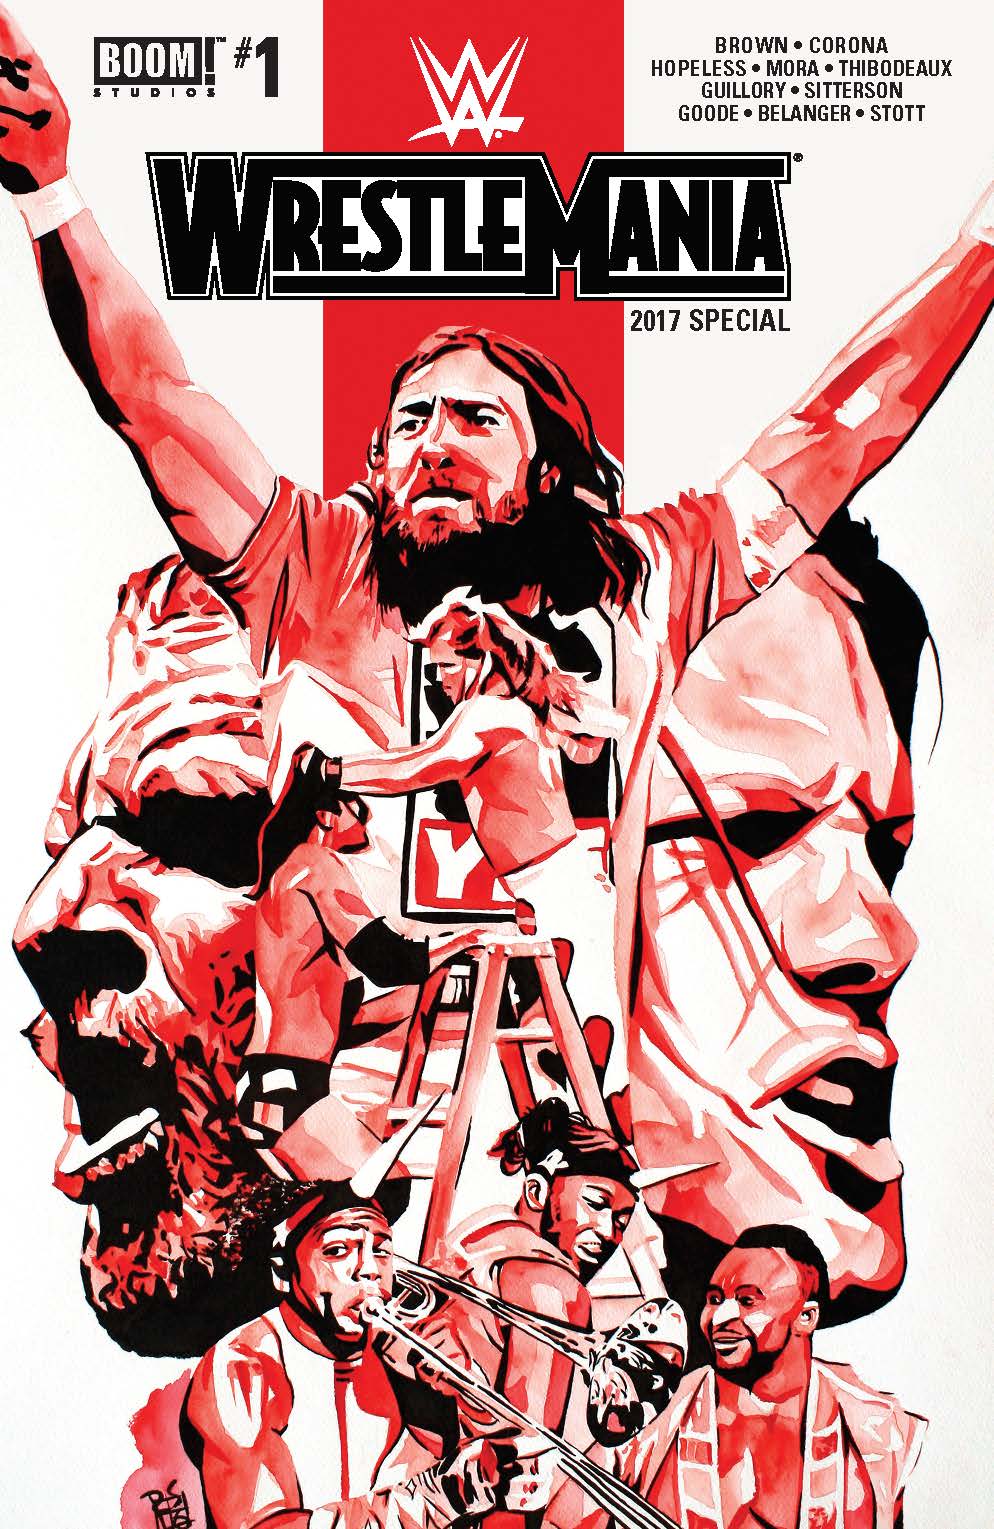 BOOM! Preview: WWE WrestleMania 2017 Special #1